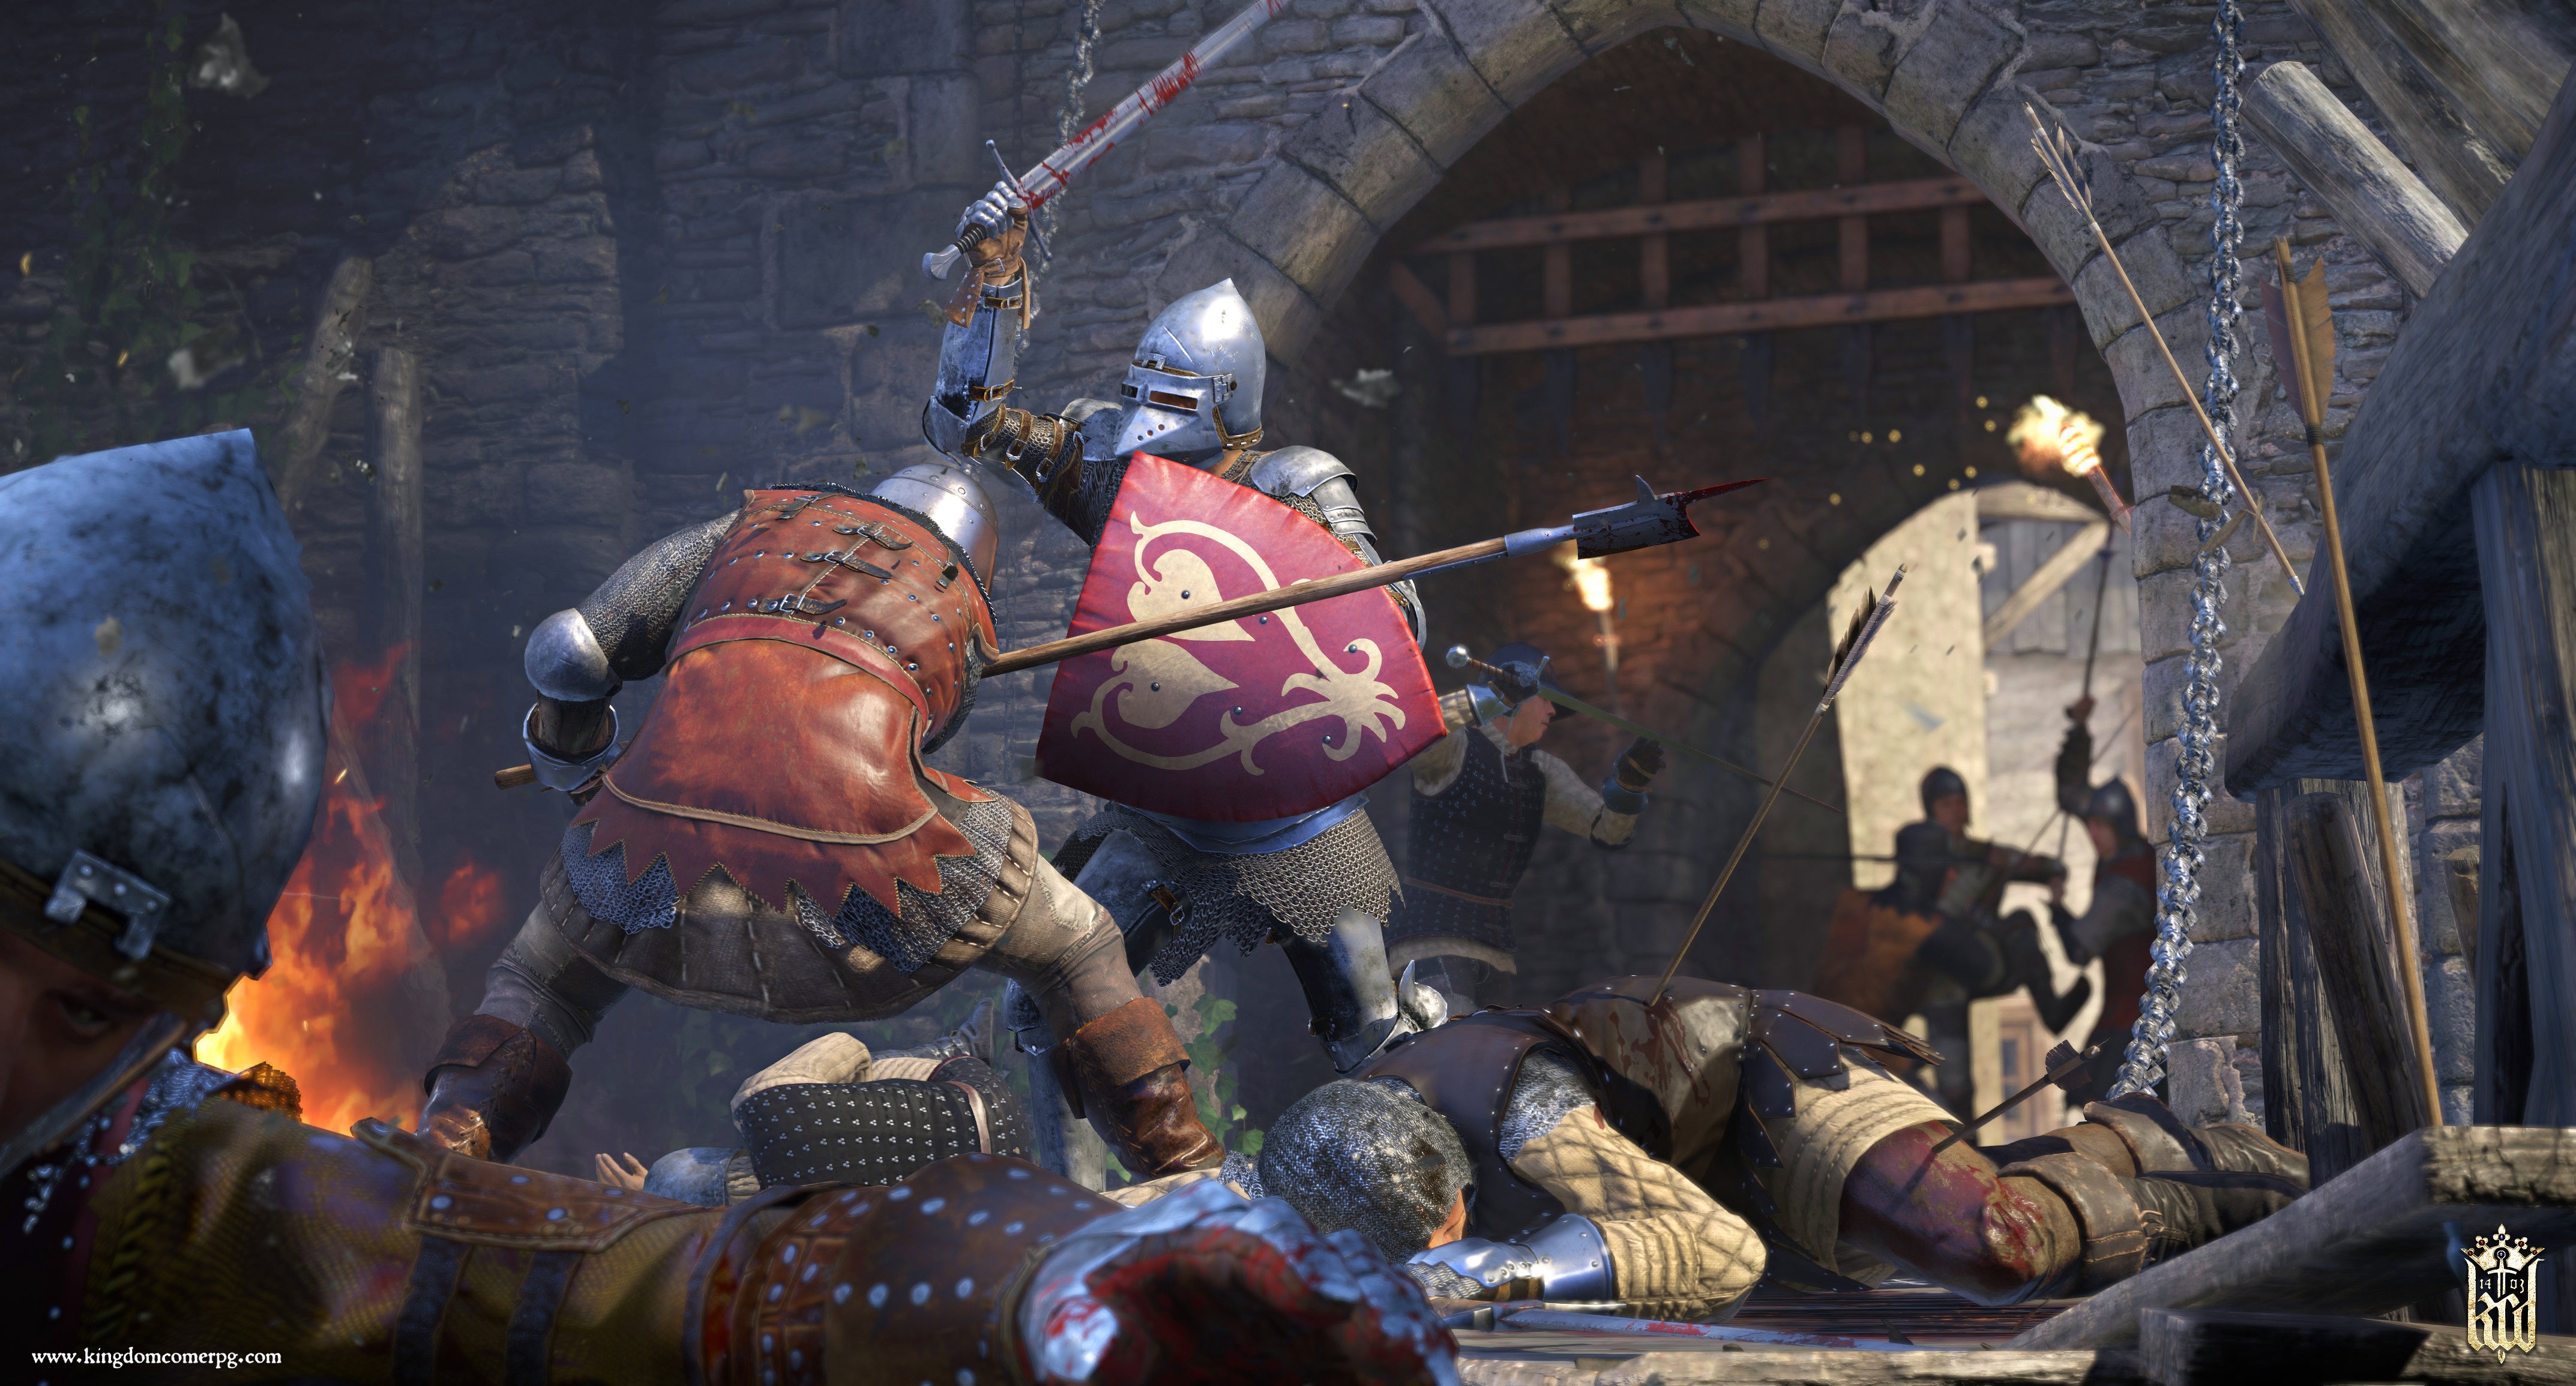 Image for Kingdom Come Deliverance All that Glisters quest guide - Chase down and beat Ulrich, find the counterfeiters